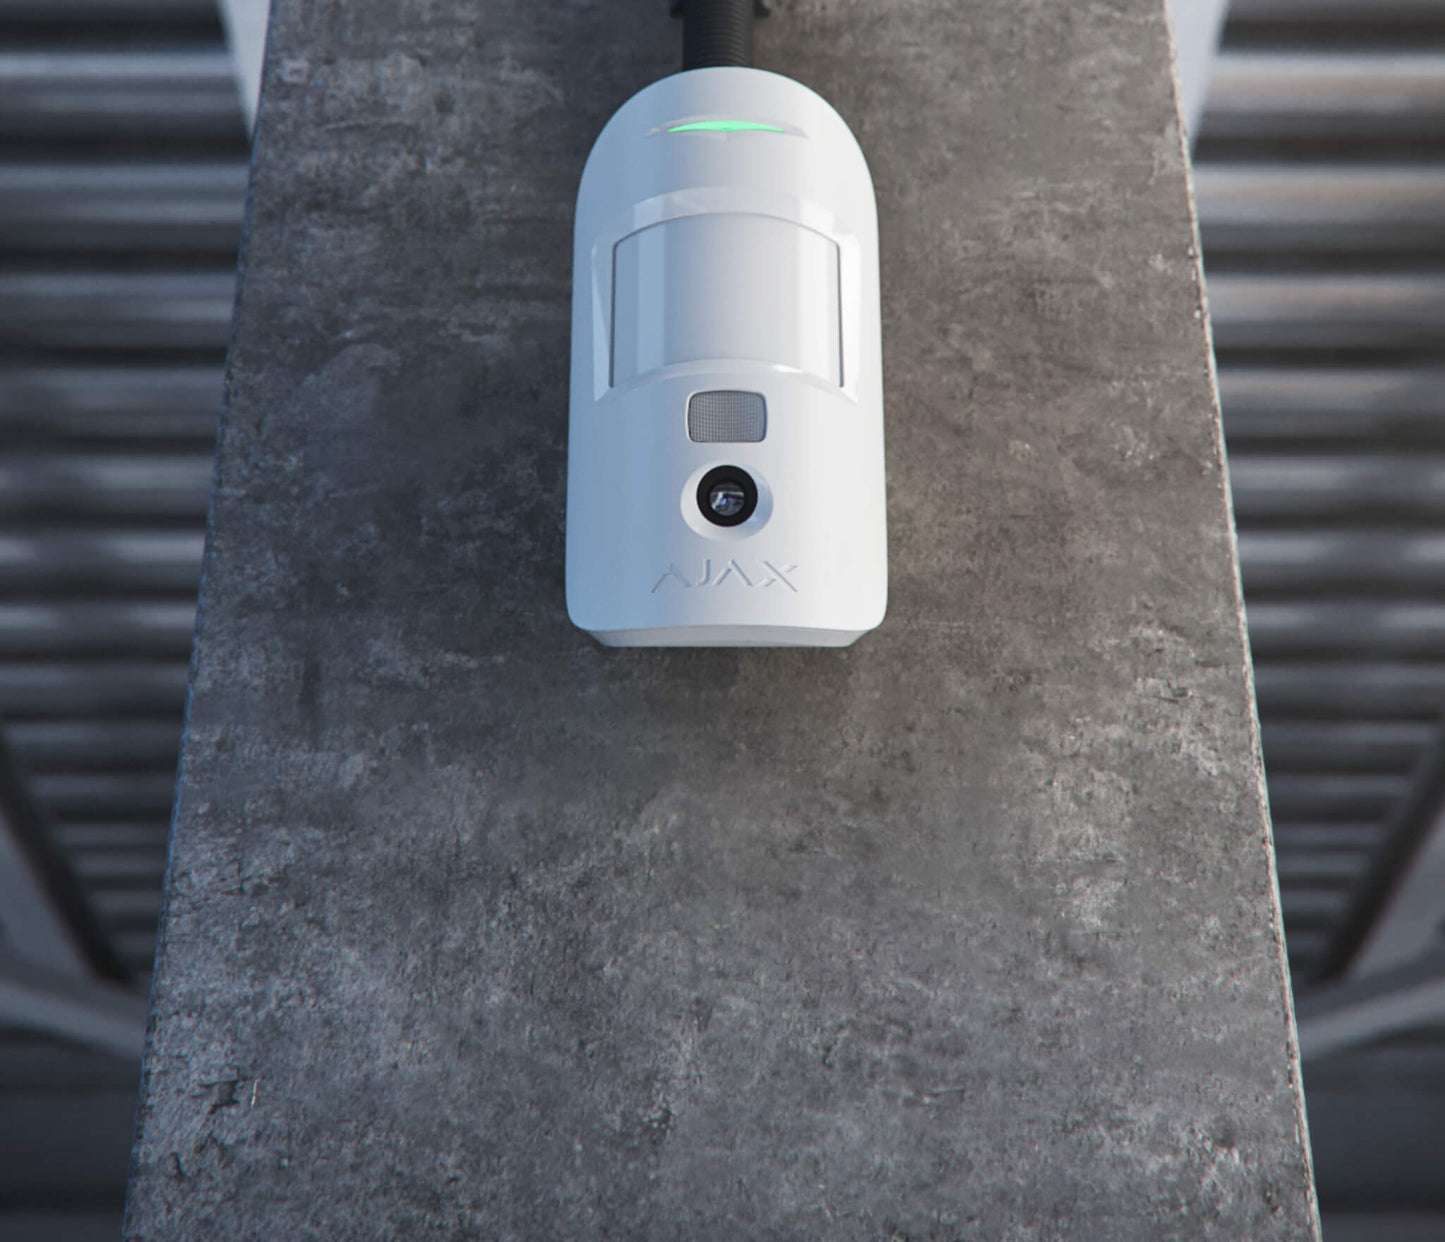 White Ajax MotionCam a wireless motion detector with a built in camera for home and business security, 110 × 65 × 50 mm in size, 86 grams in weight.Mounted to a wall in a warehouse for business security front view of device